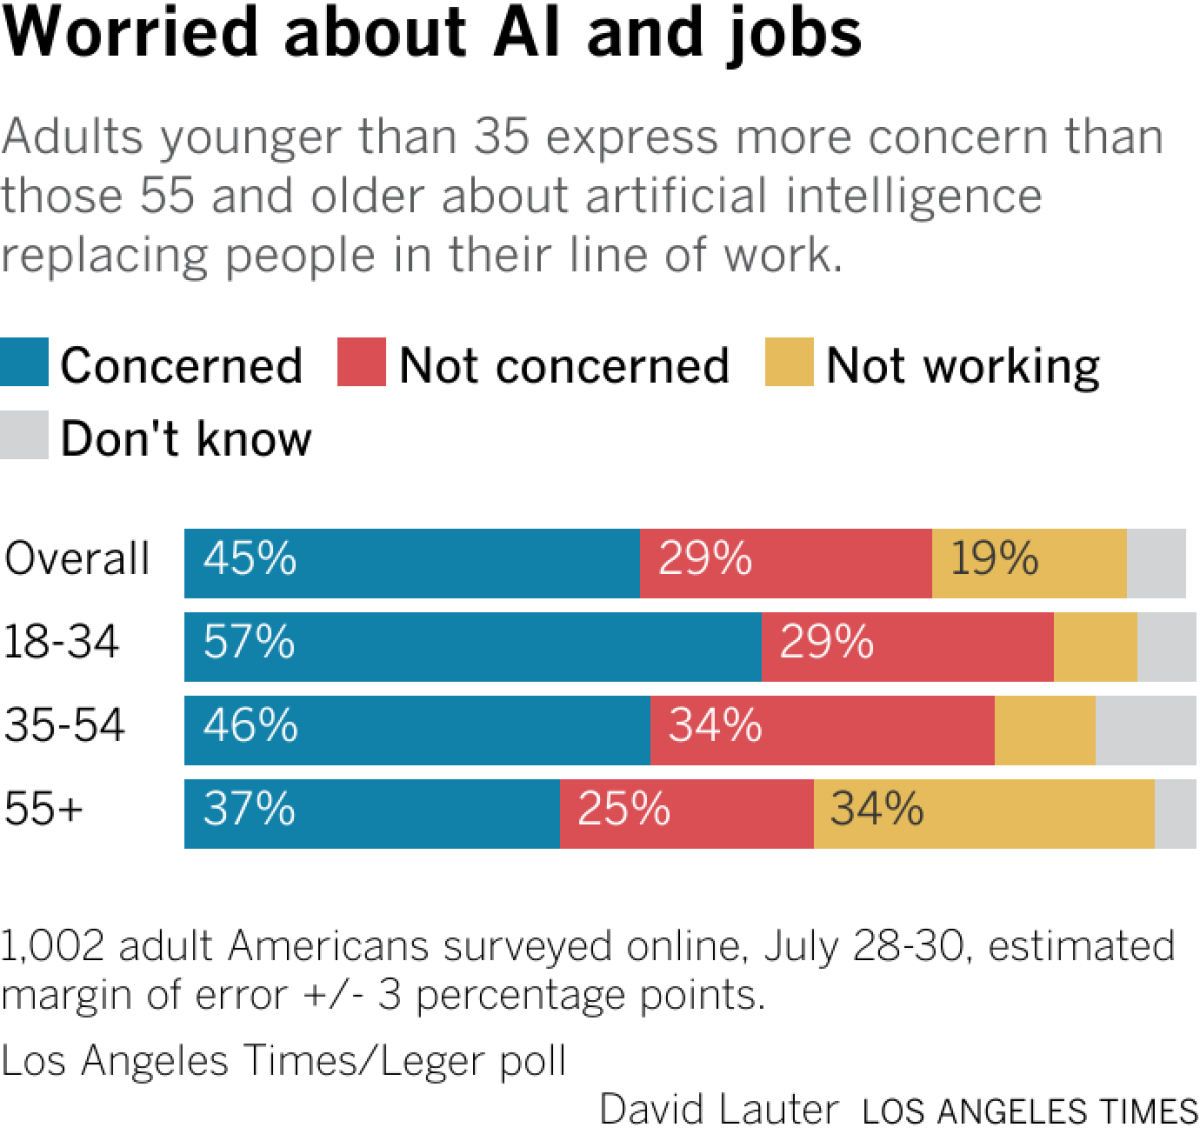 Adults younger than 35 express more concern than those 55 and older about artificial intelligence replacing people in their line of work.